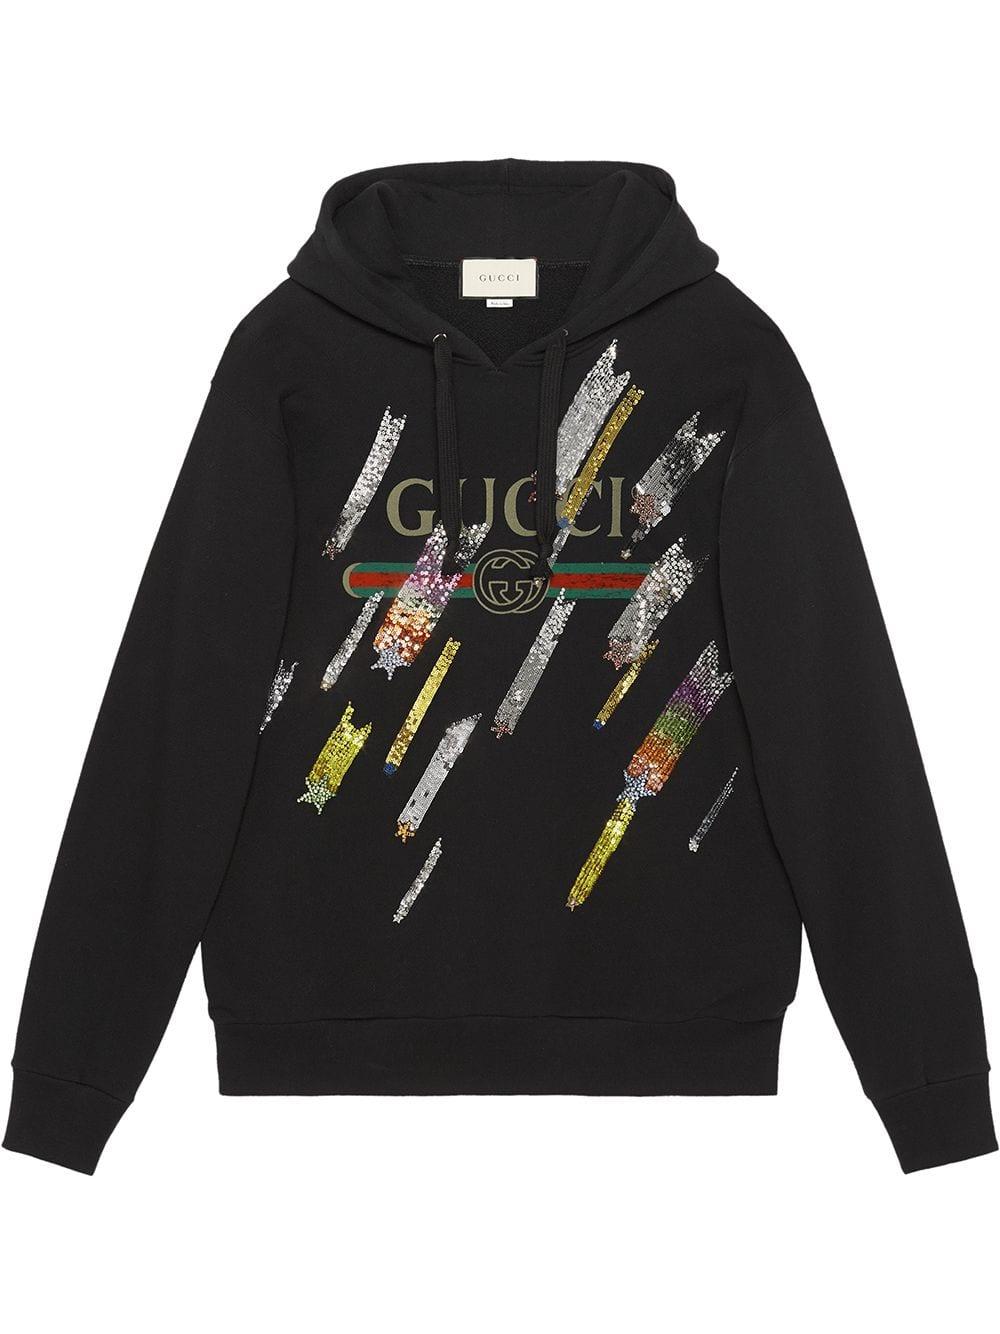 Gucci Cotton Logo Sweatshirt With Shooting Stars in Black - Lyst